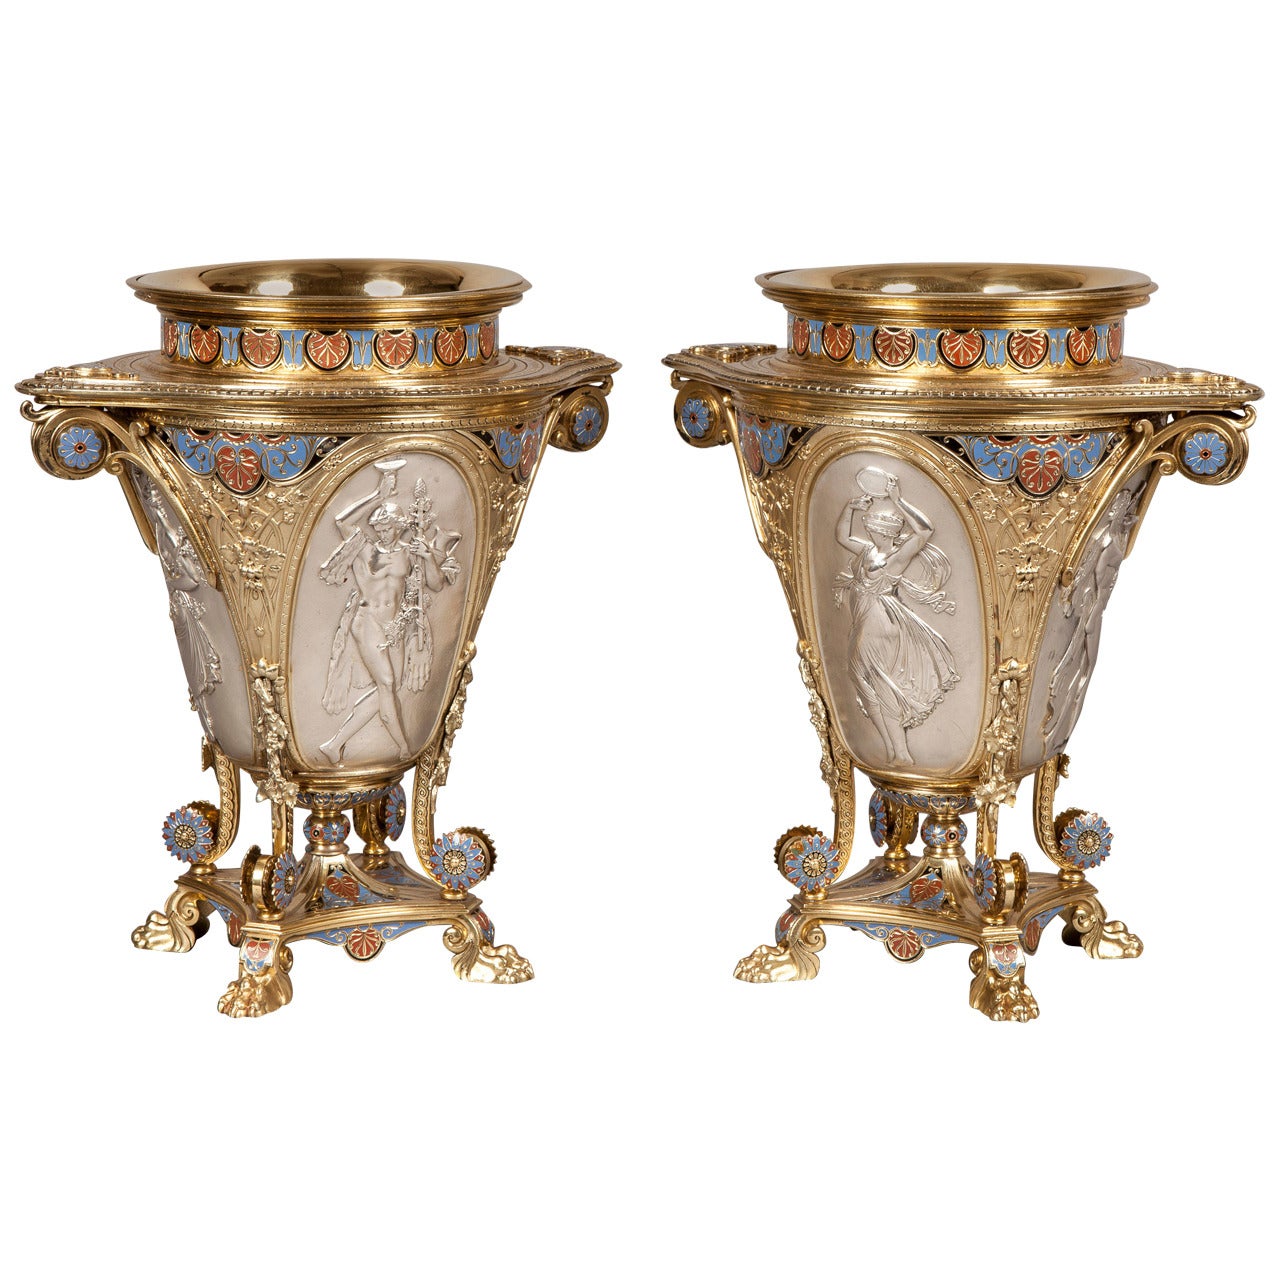 Pair of Parcel Gilt Silver and Enamelled Wine Coolers by Elkington